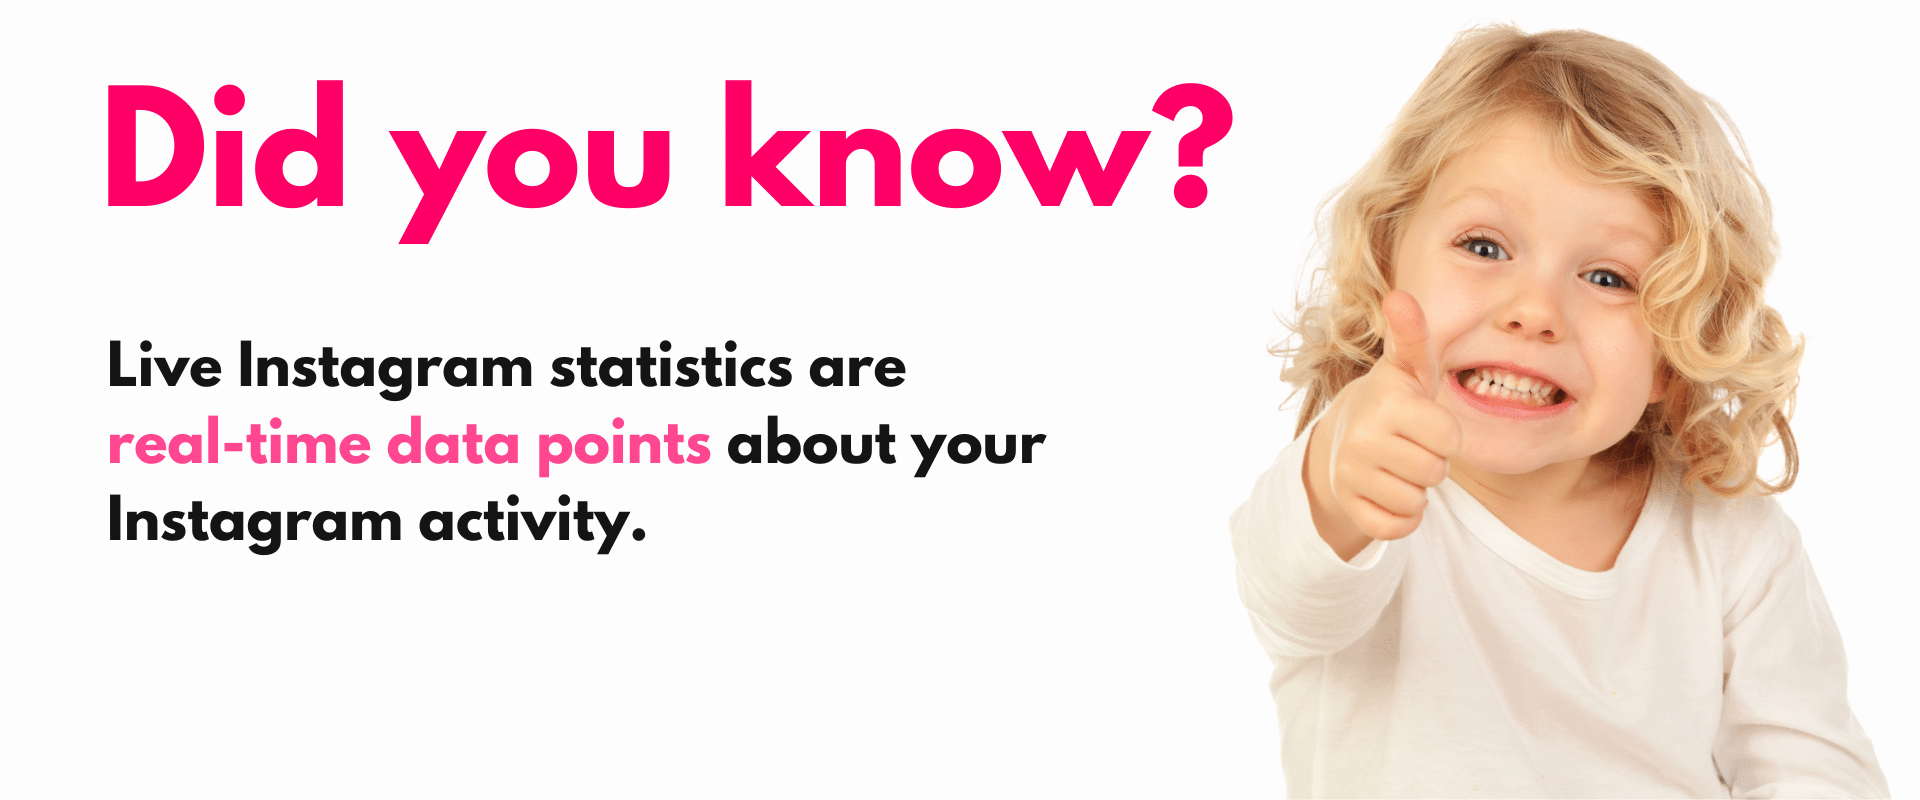 Did you know? live time statistics are road data points for your instagram activity.